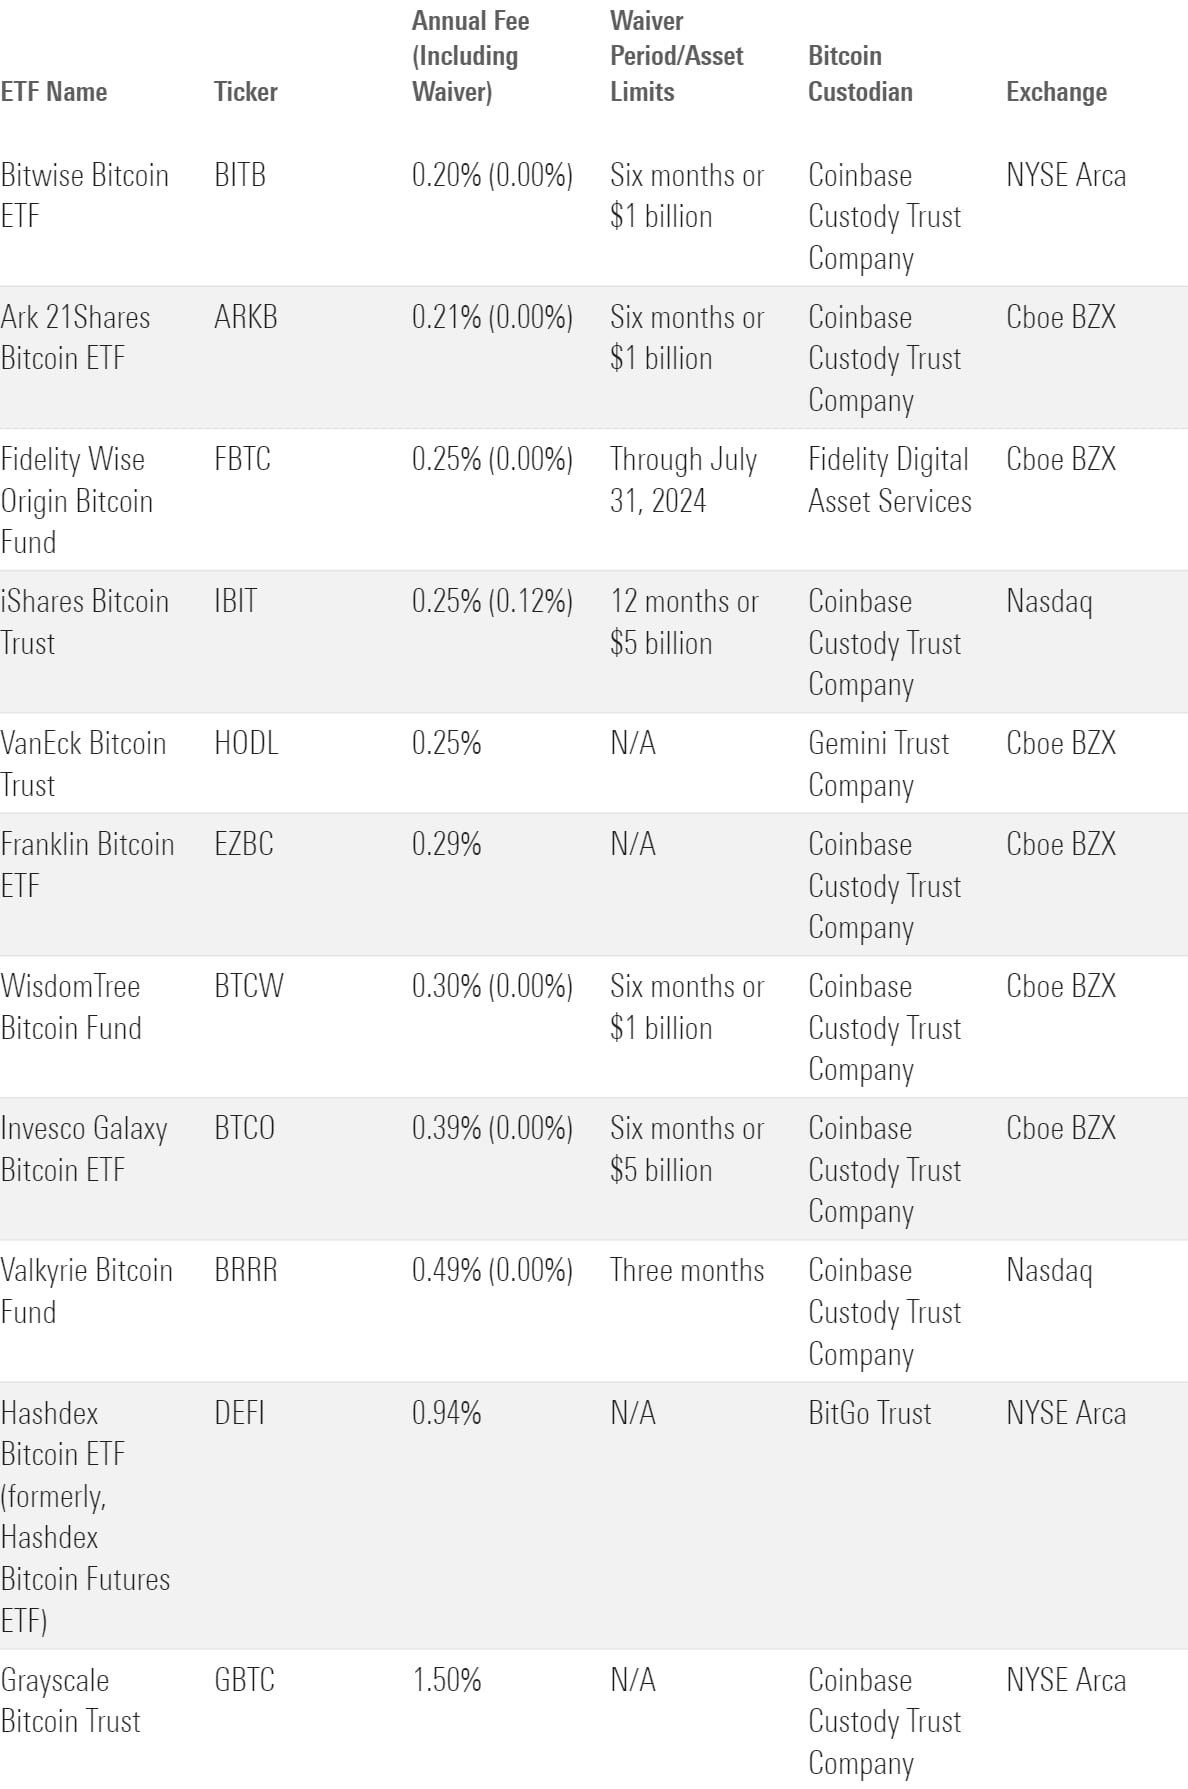 Table of spot bitcoin ETFs, their tickers and fees, custodial agreements, and listing exchange.